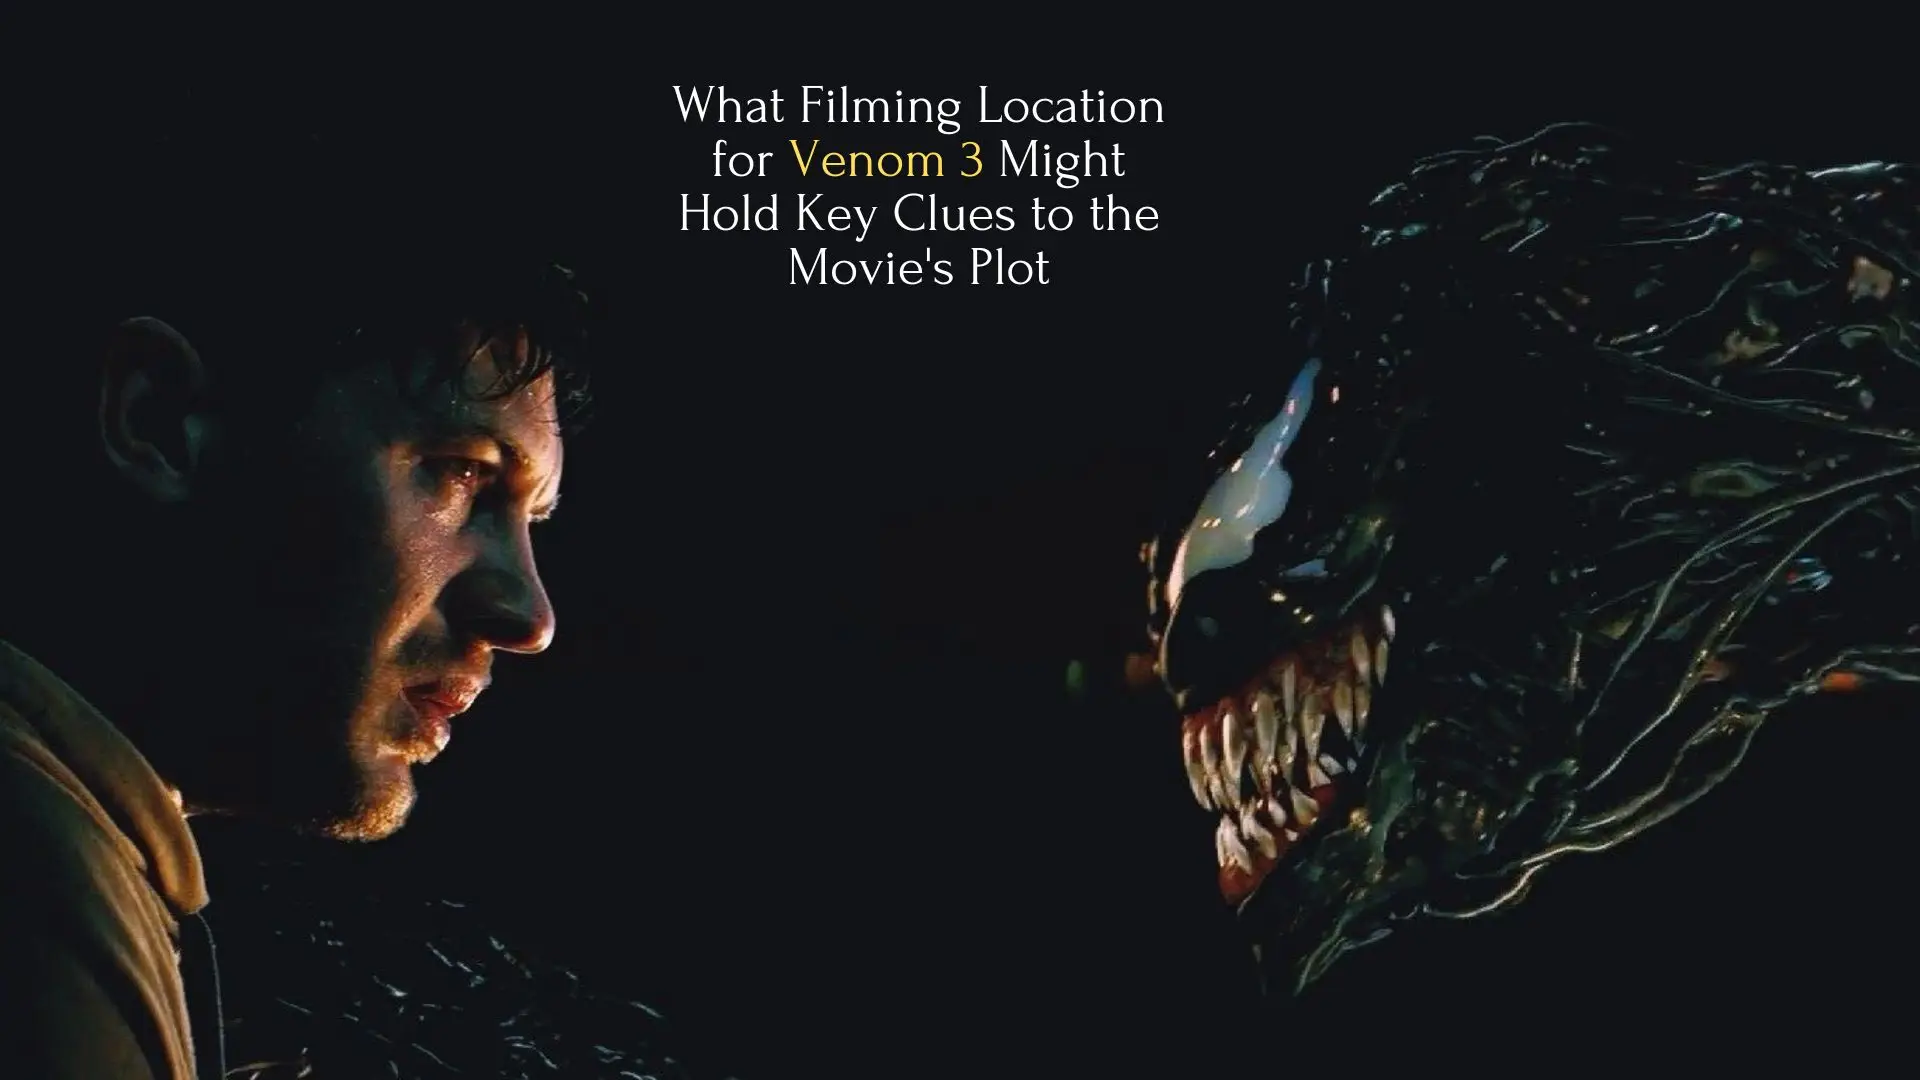 What Filming Location for Venom 3 Might Hold Key Clues to the Movie's Plot